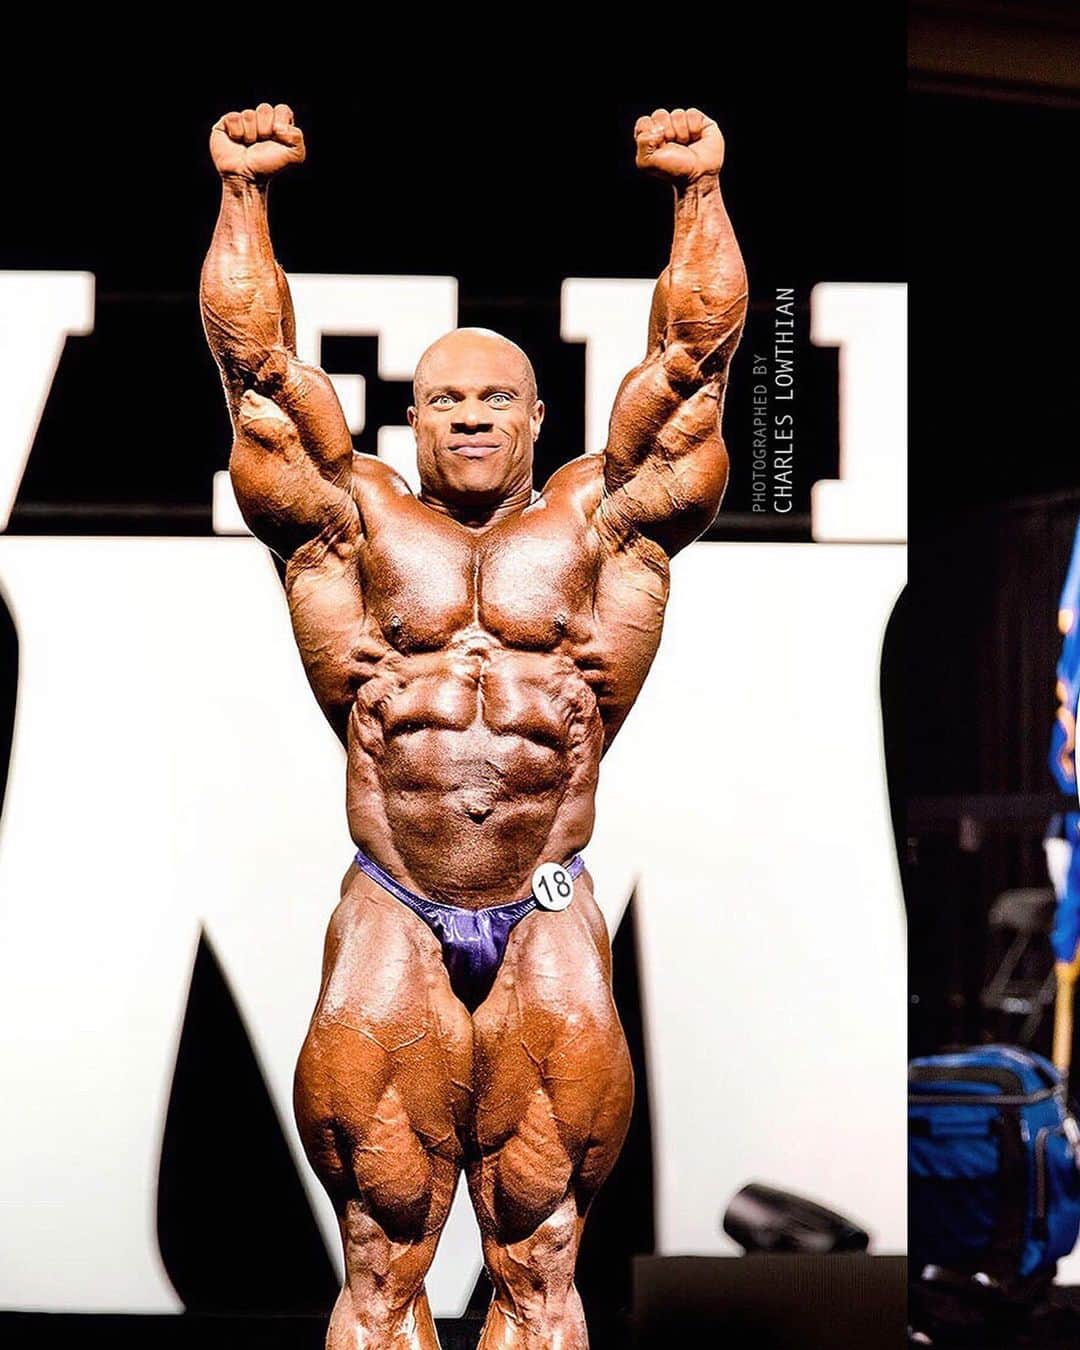 Phil Heathのインスタグラム：「Six years ago I took these photographs of Phil Heath. The year he was successful in defending his Mr Olympia title for the seventh consecutive time. A reign only two other men in history have accomplished (note: consecutively). Recently I asked Phil, years after this competition, if he recalled what his thoughts were that night (in the last image), as he was up there on the Olympia stage; having just been announced (by The Rock) as The 7X Mr Olympia: “The last pic is everything Brother. The disbelief in self, later submitting to one’s destiny relentlessly day after day year after year to be in a position to seize a title which holds more than that I could ever push or pull. The Sandow! The only trophy in bodybuilding which defines the greatest of all time!” - @philheath @mrolympiallc」